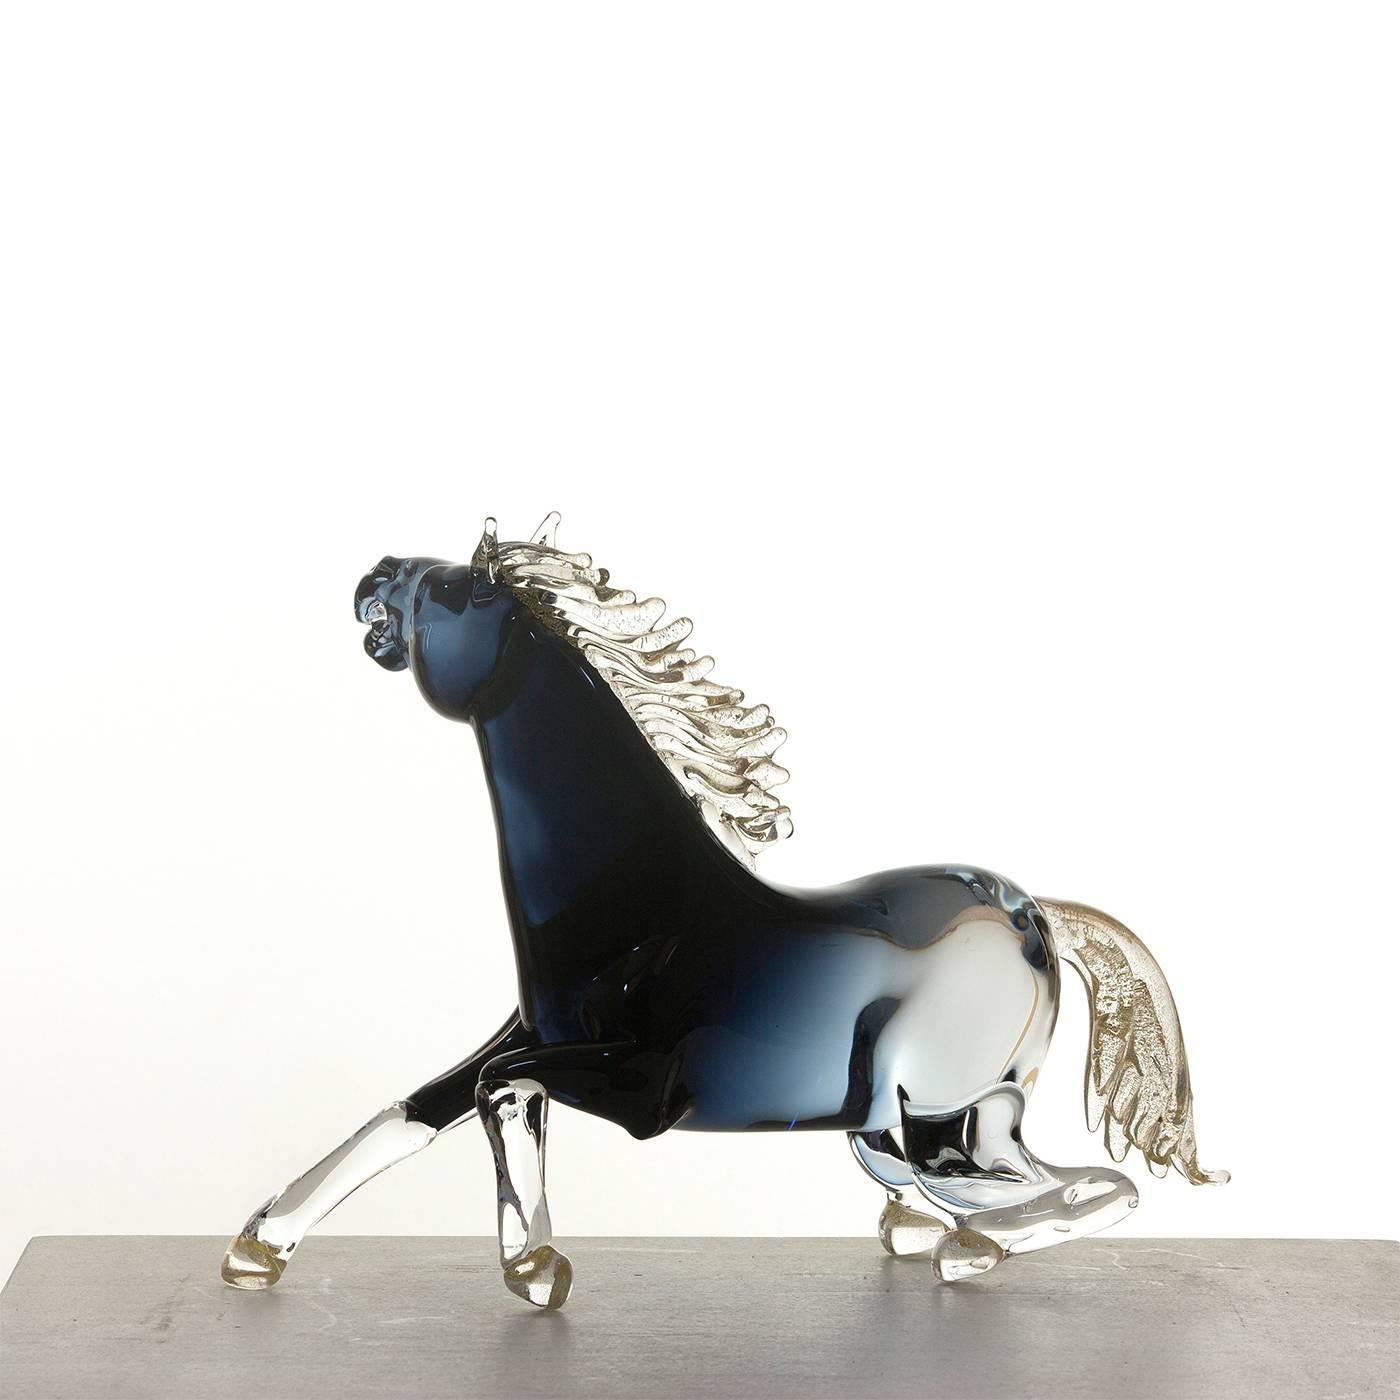 This exceptionally animated large sitting horse is entirely handmade by the master glass blower Zanetti on the island of Murano in Venice. The mane, tail and hooves have 24-karat gold details, while the shaded black glass of the body features subtle